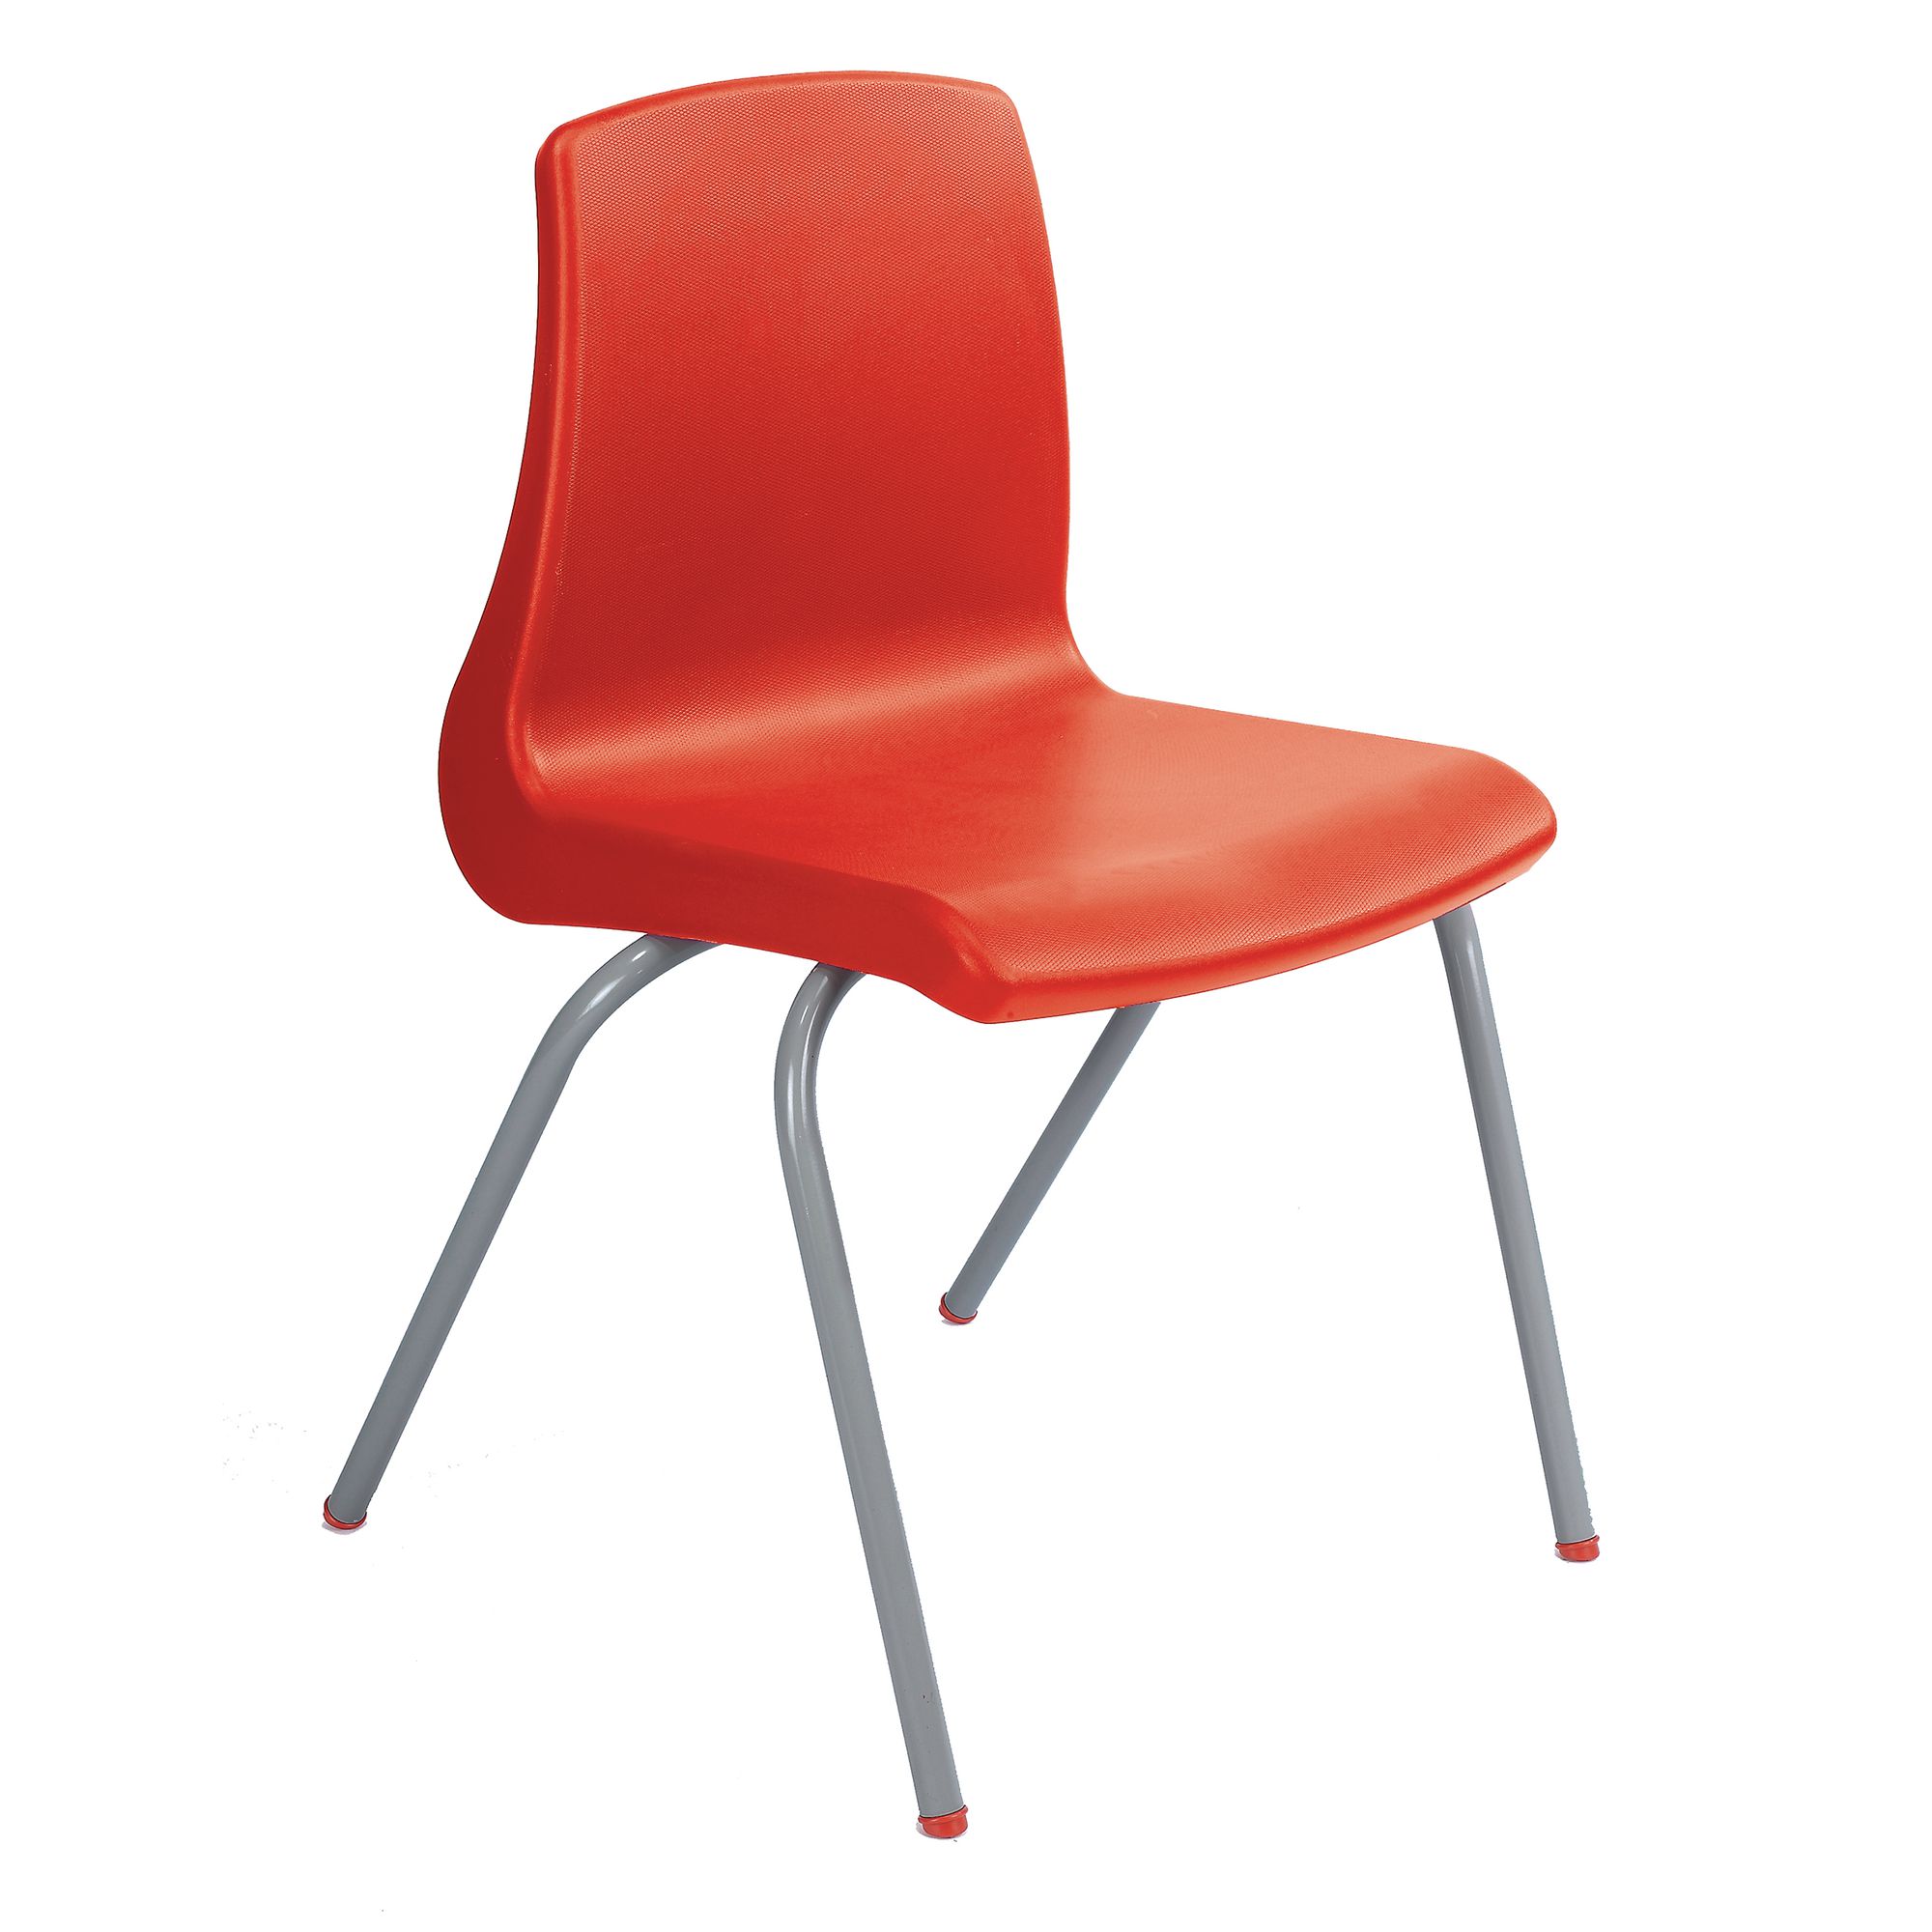 NP Chairs H260mm - Red